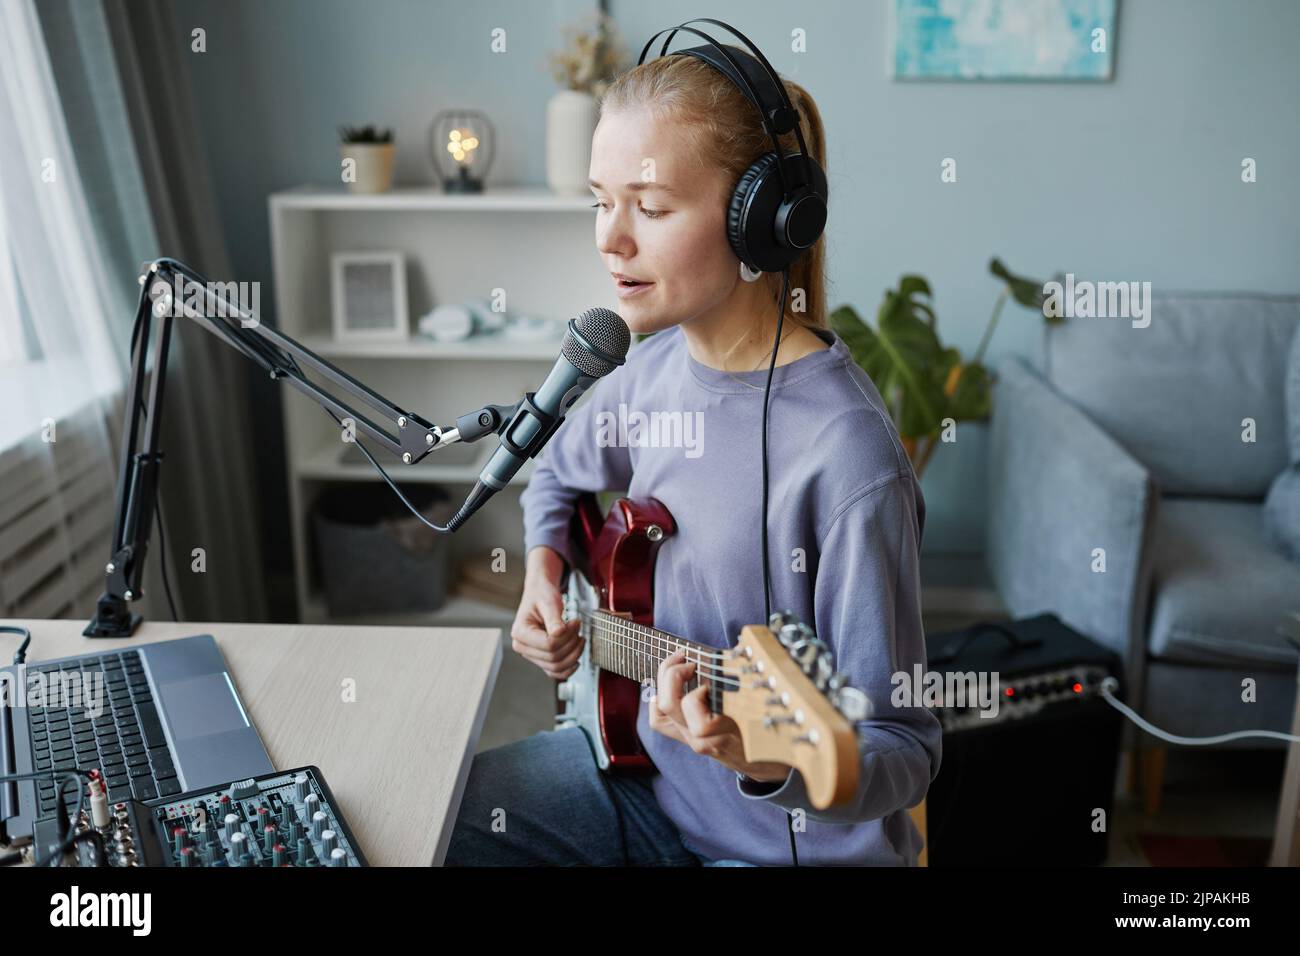 Side view portrait of blonde young woman playing electric guitar and singing to microphone in home recording studio, copy space Stock Photo